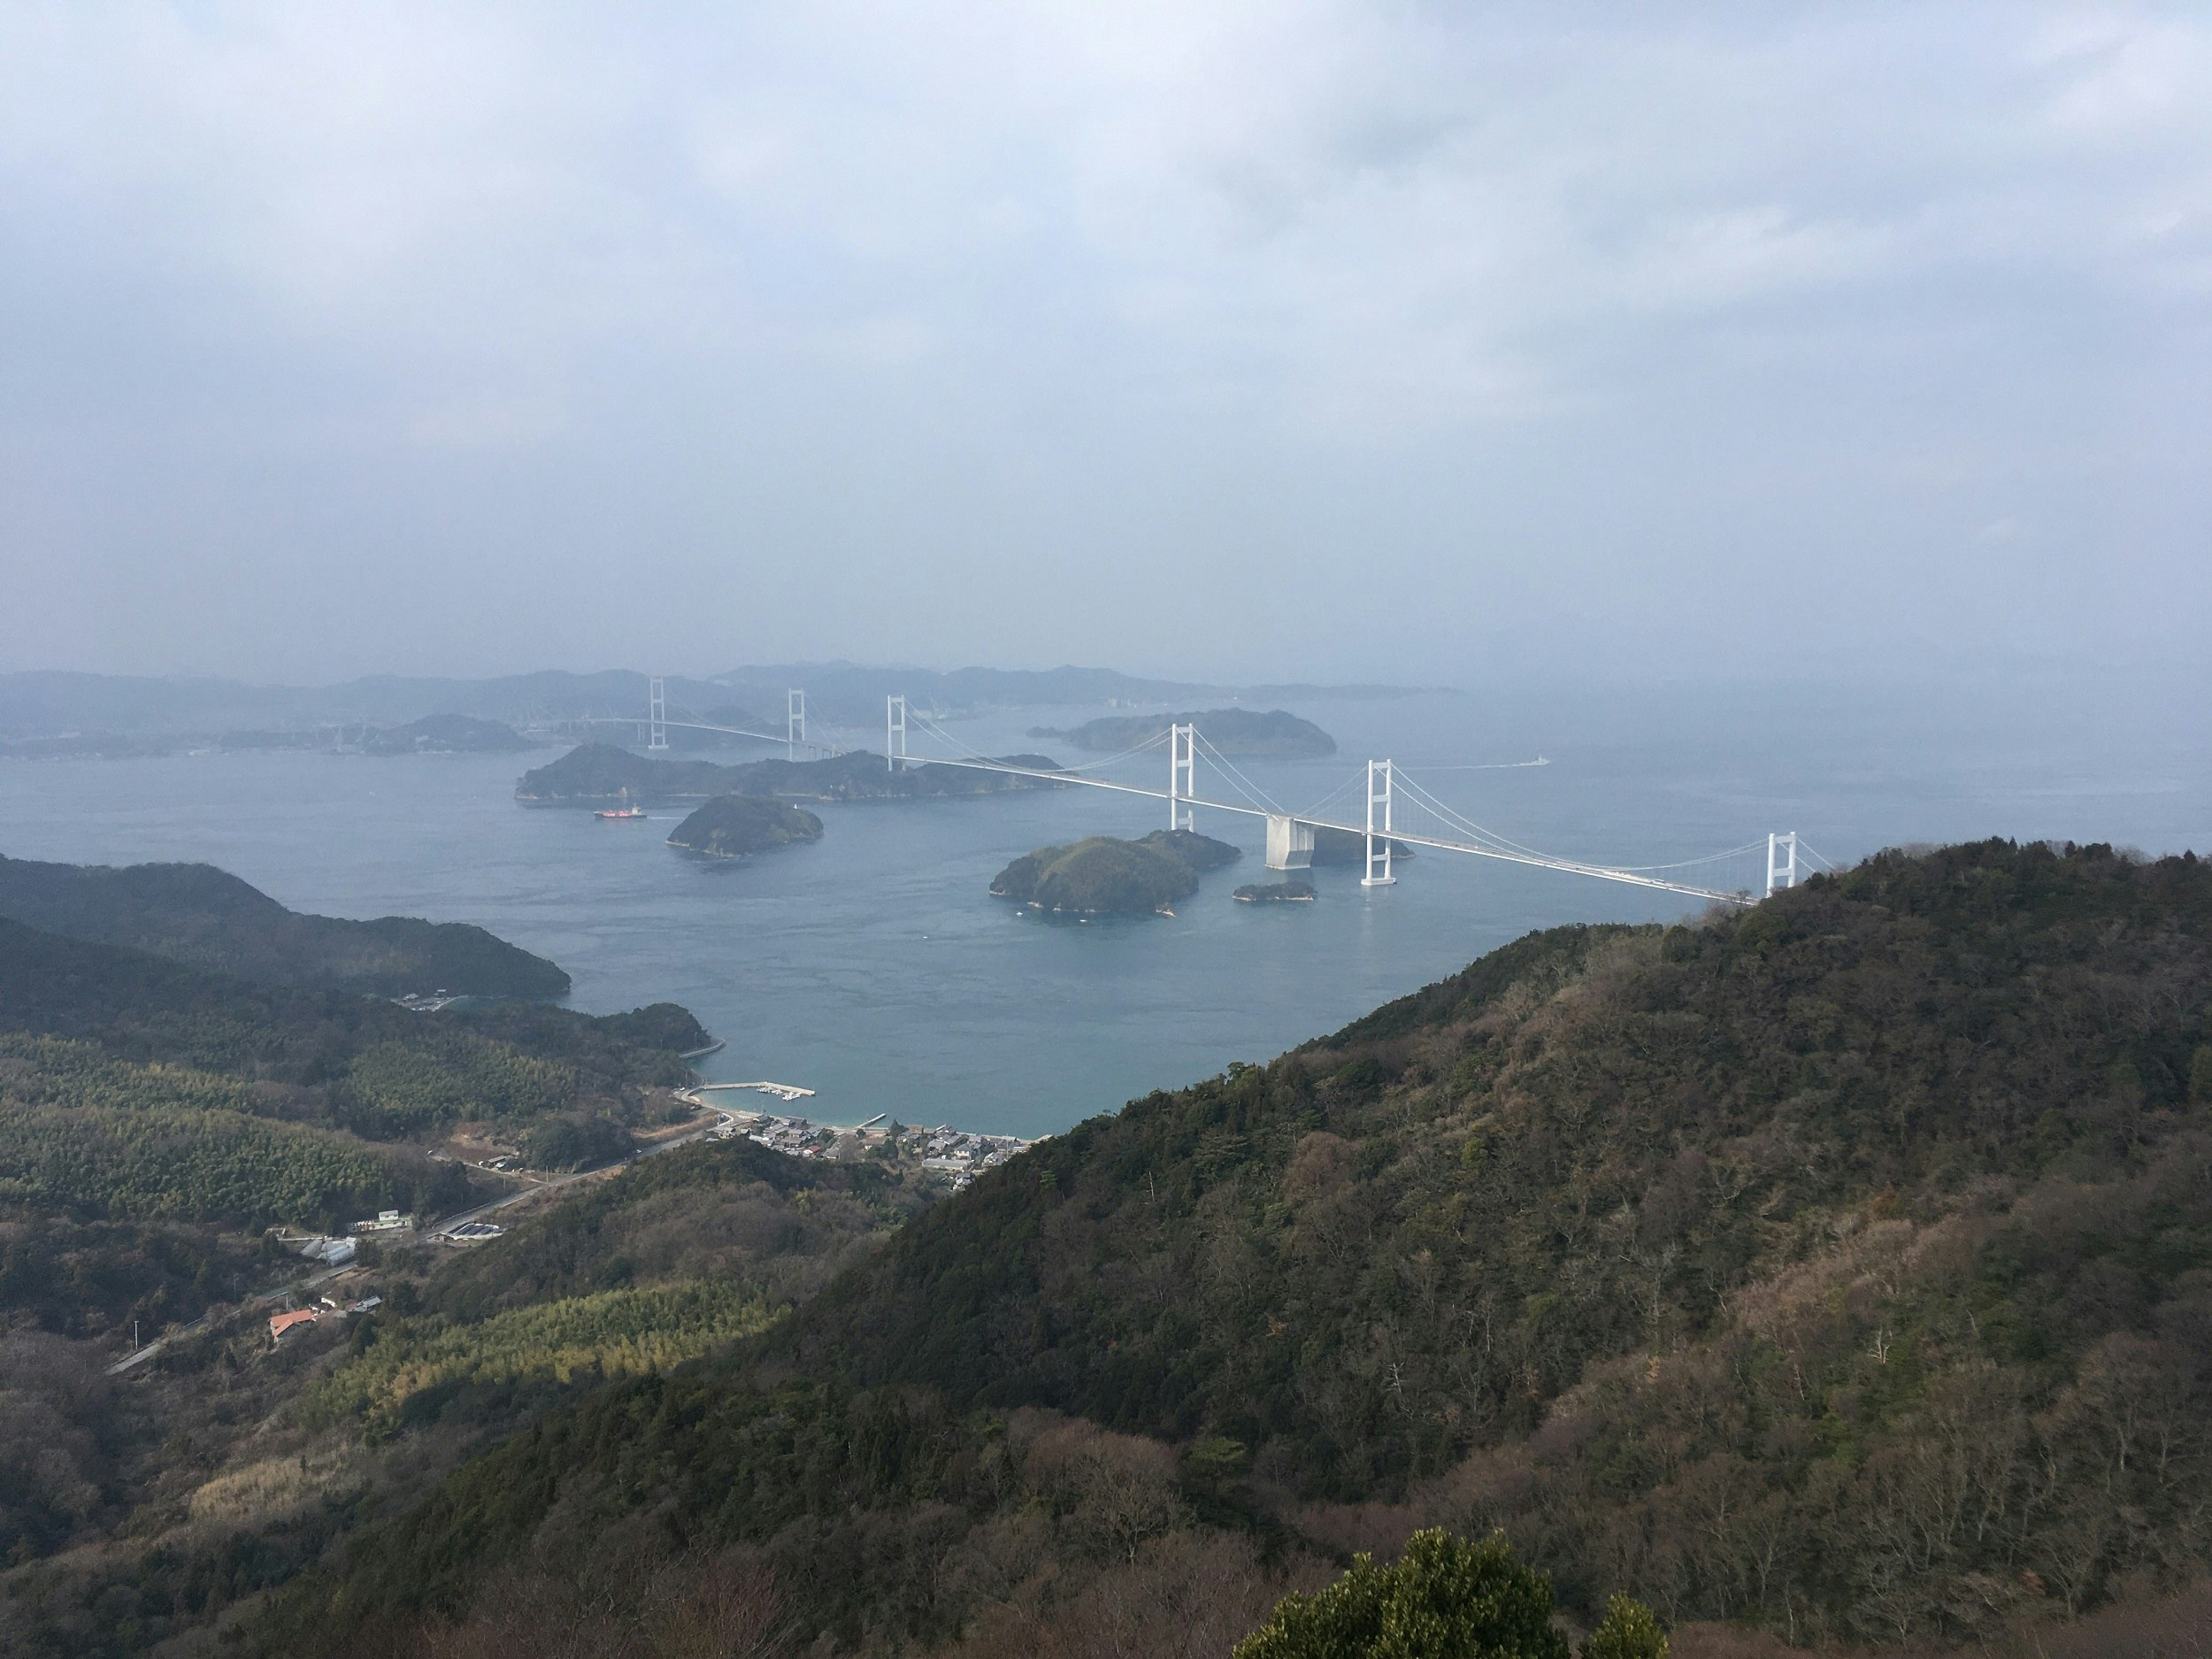 A view down hillsides to a village and across a sea to a large white suspension bridge stretching into the distance.